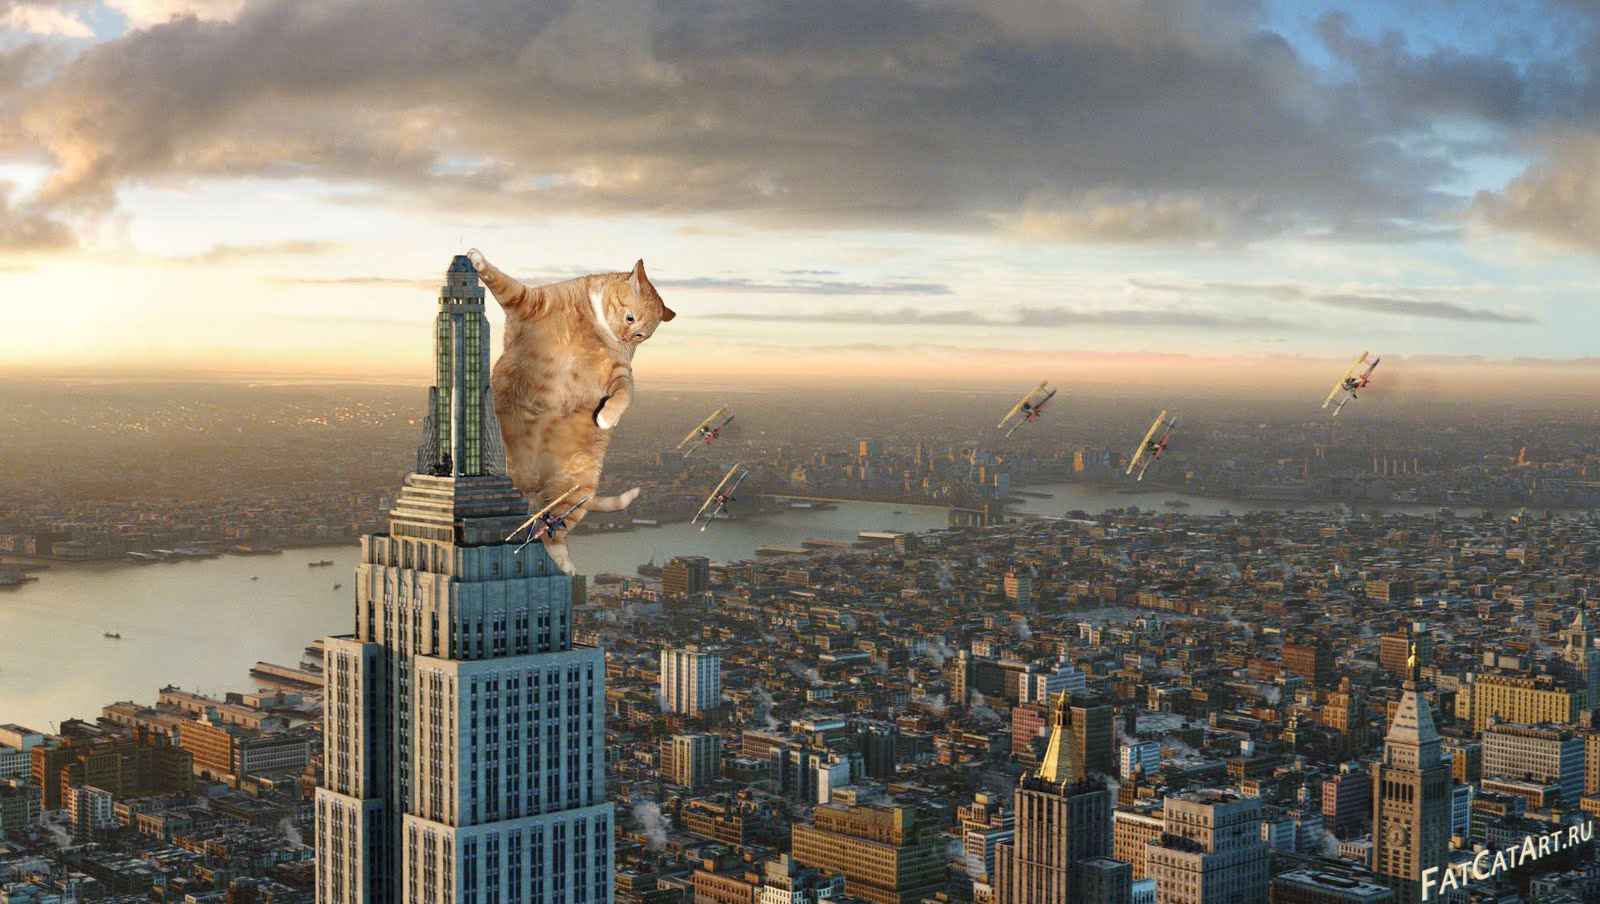 Meanwhile in Russia: the Cat plots to play King-Kong role